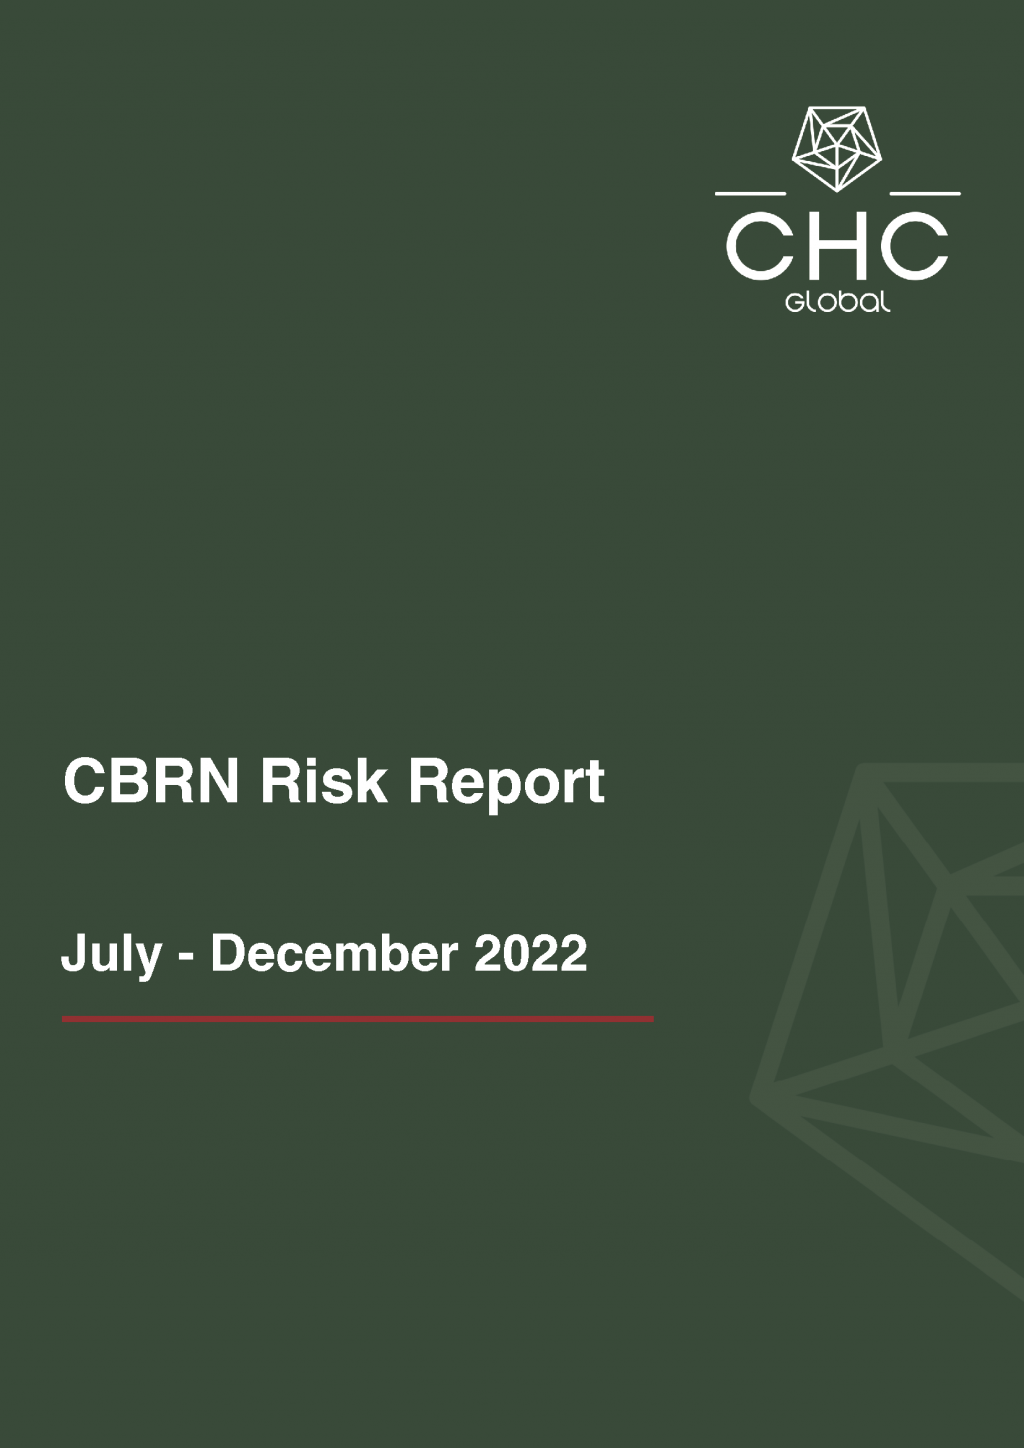 Front page of the CBRN Risk report - In green.